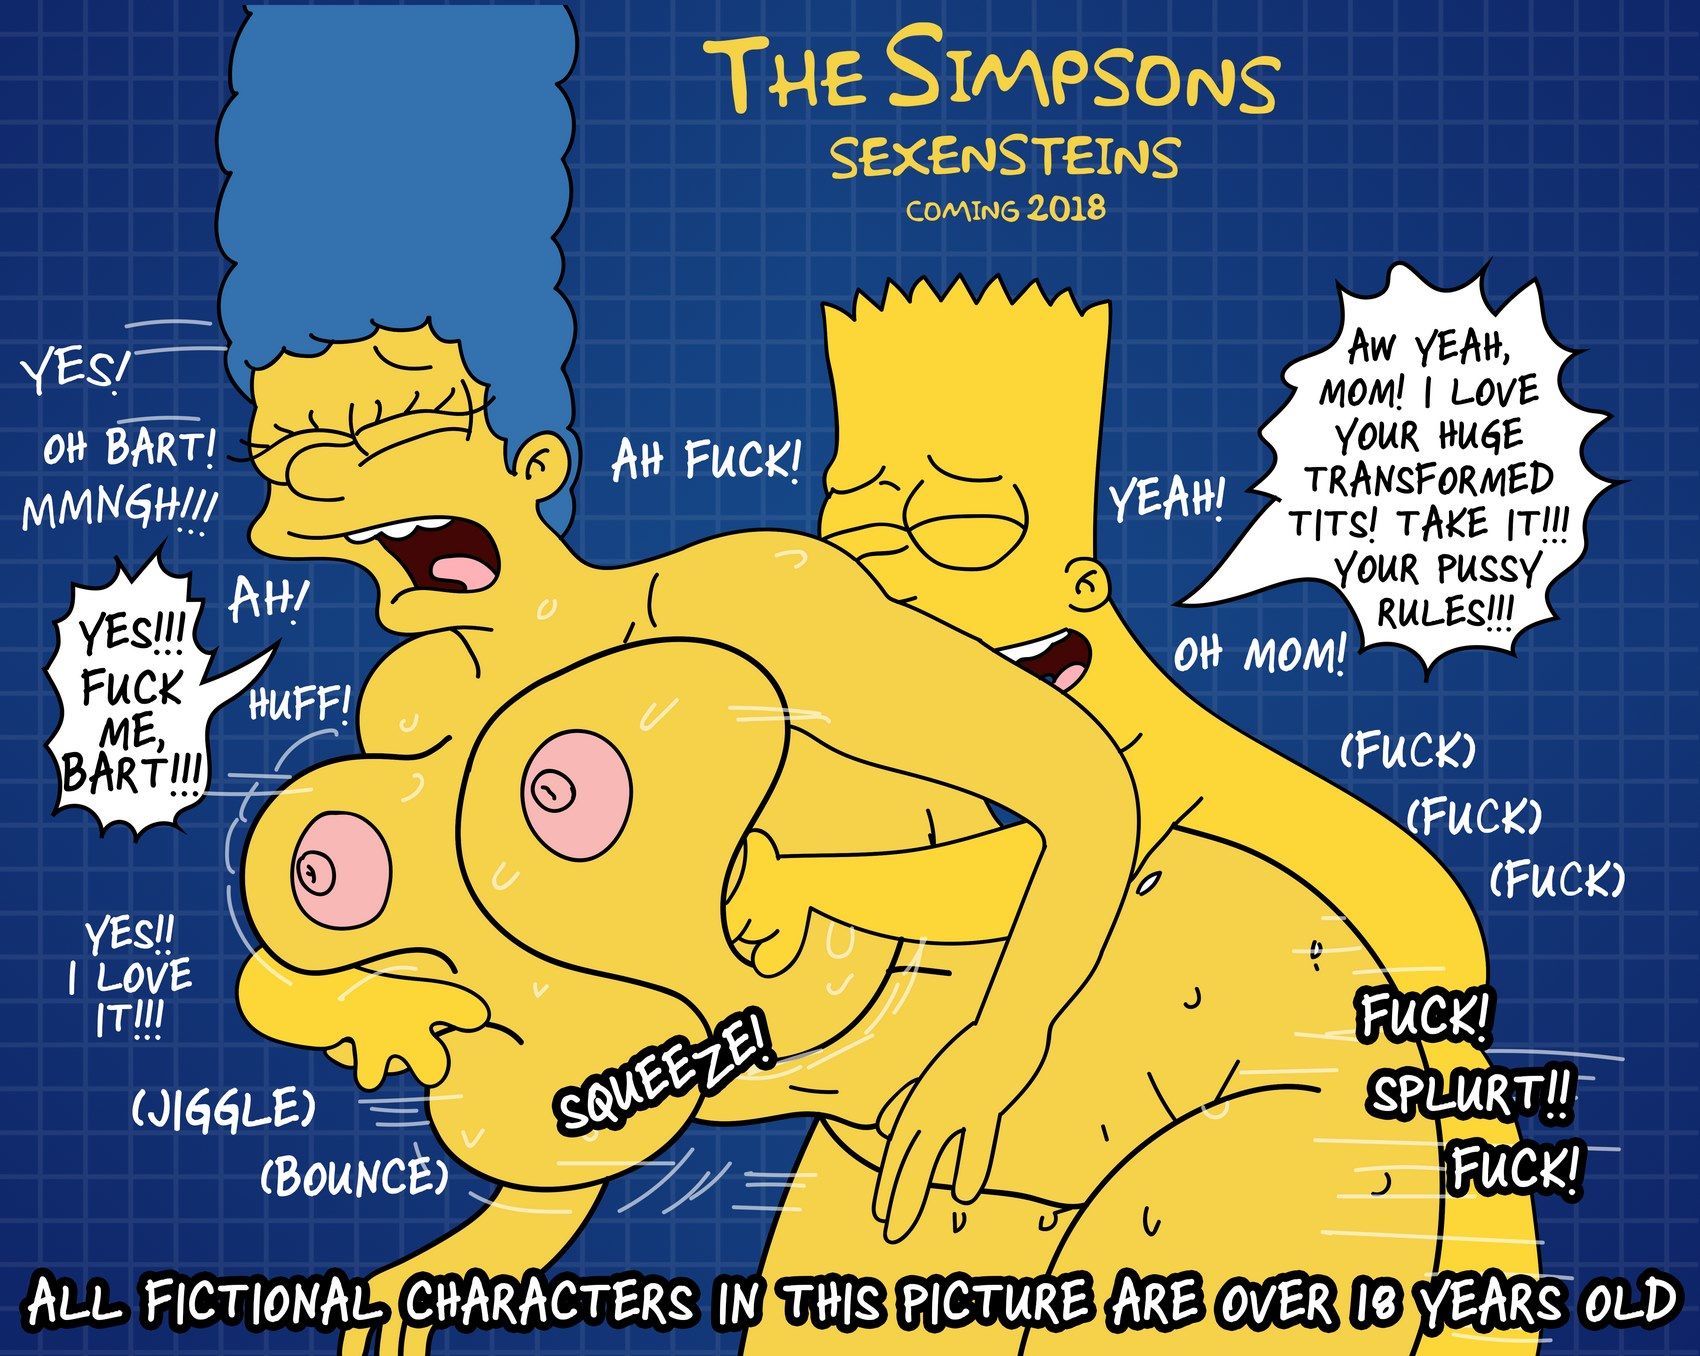 Brompolos - The Simpsons are Sexenteins page 3